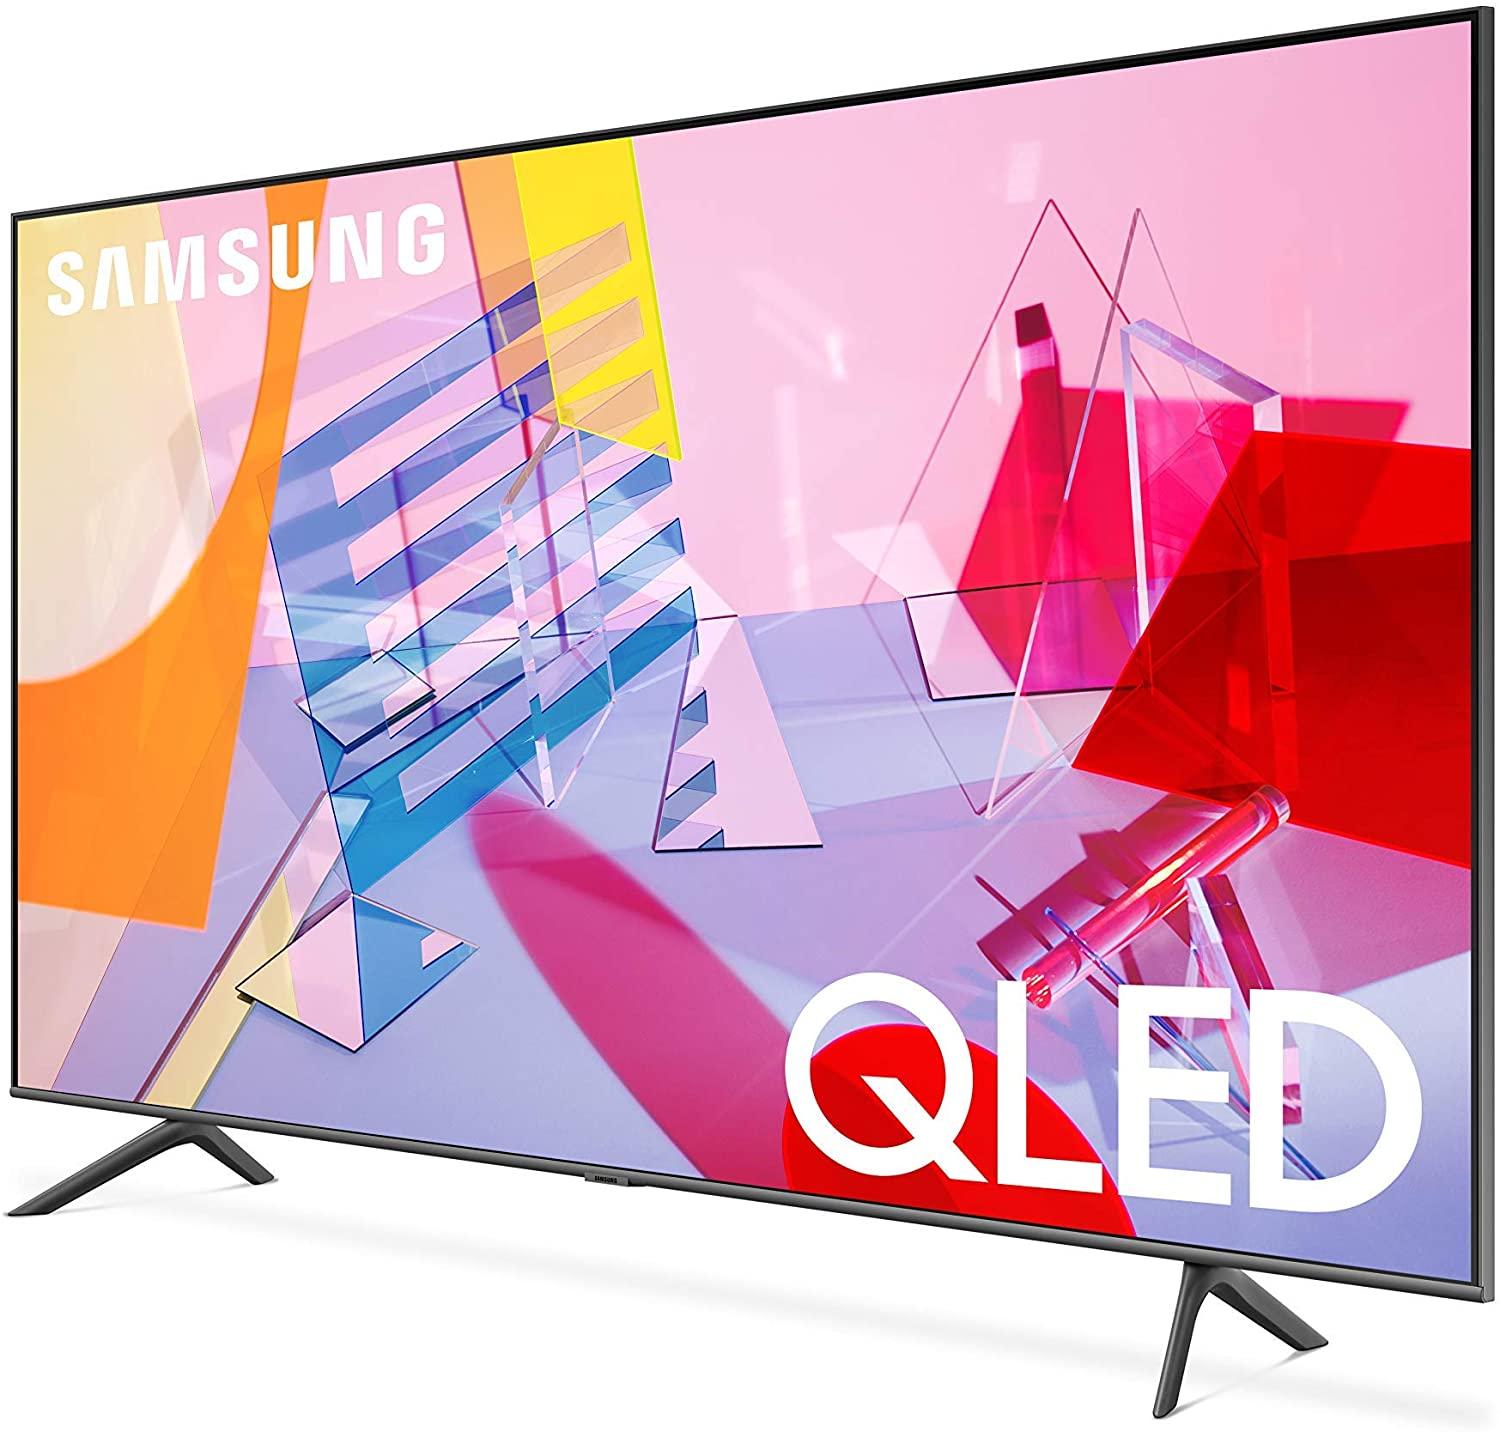 Chance to Win a 85in Samsung Q60T QLED 4K Smart TV from Newegg